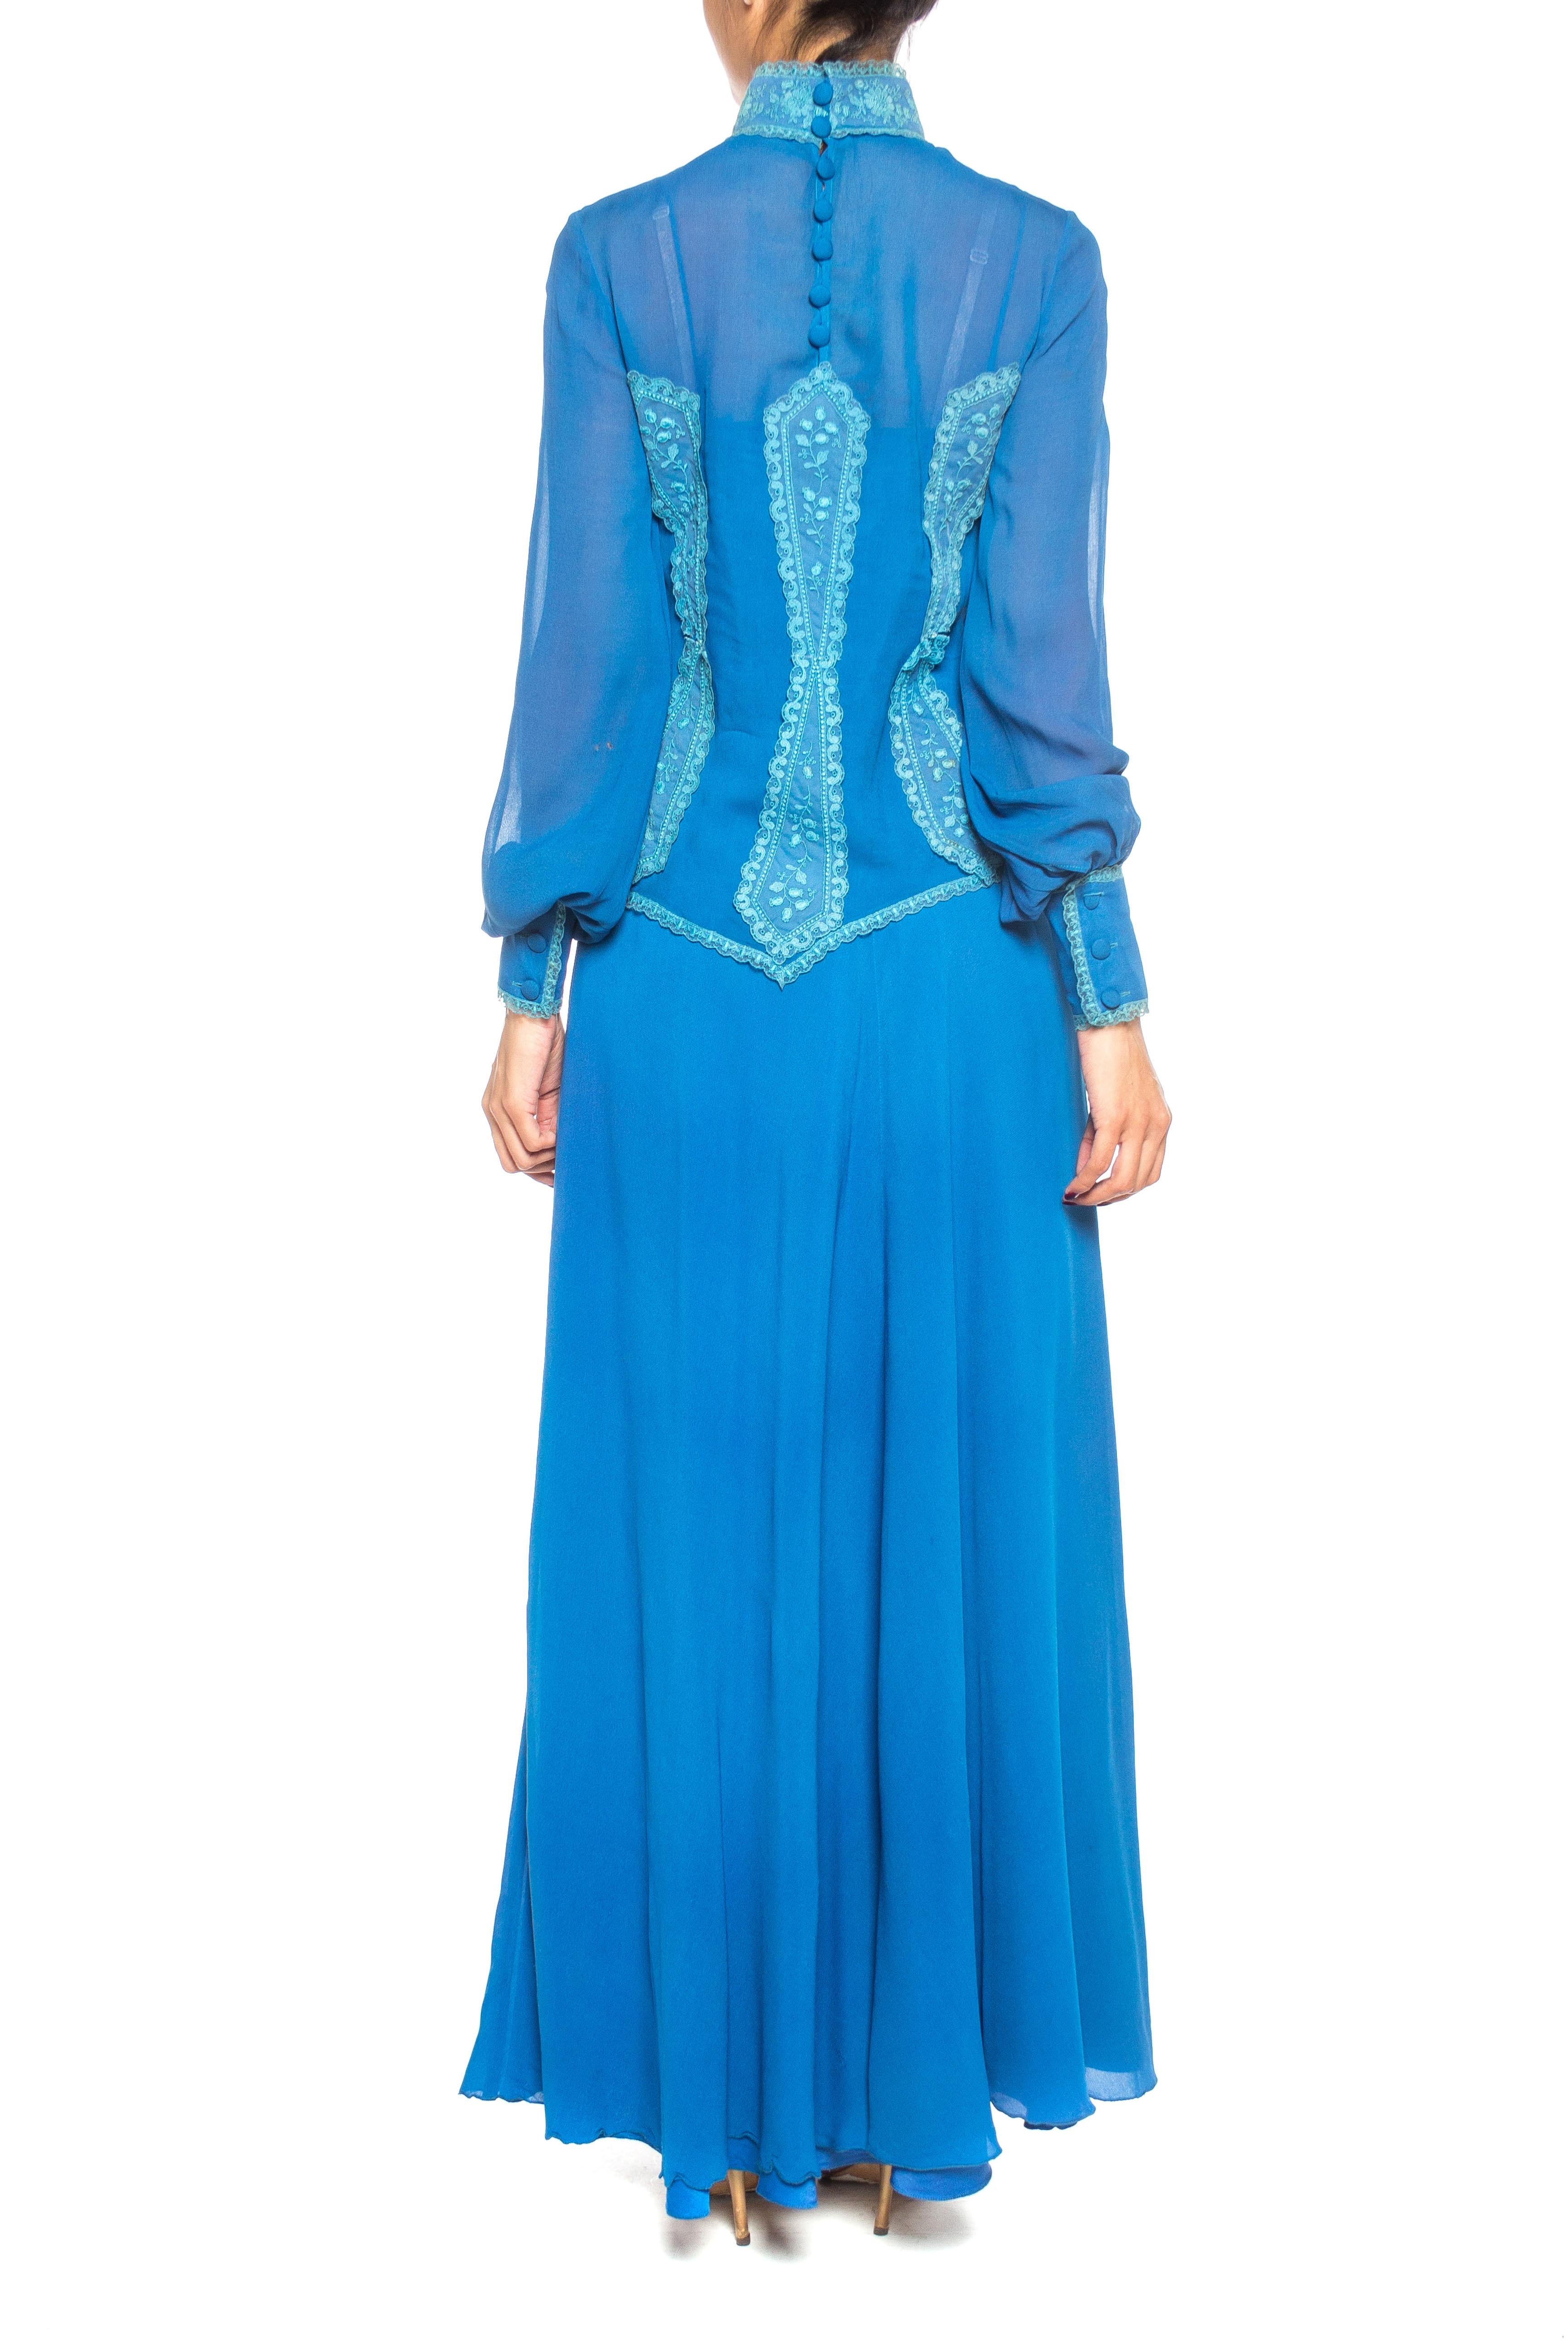 1970S ENZO RUSSO COUTURE Blue Silk Chiffon Victorian Style Dress With Lace Blou In Excellent Condition For Sale In New York, NY